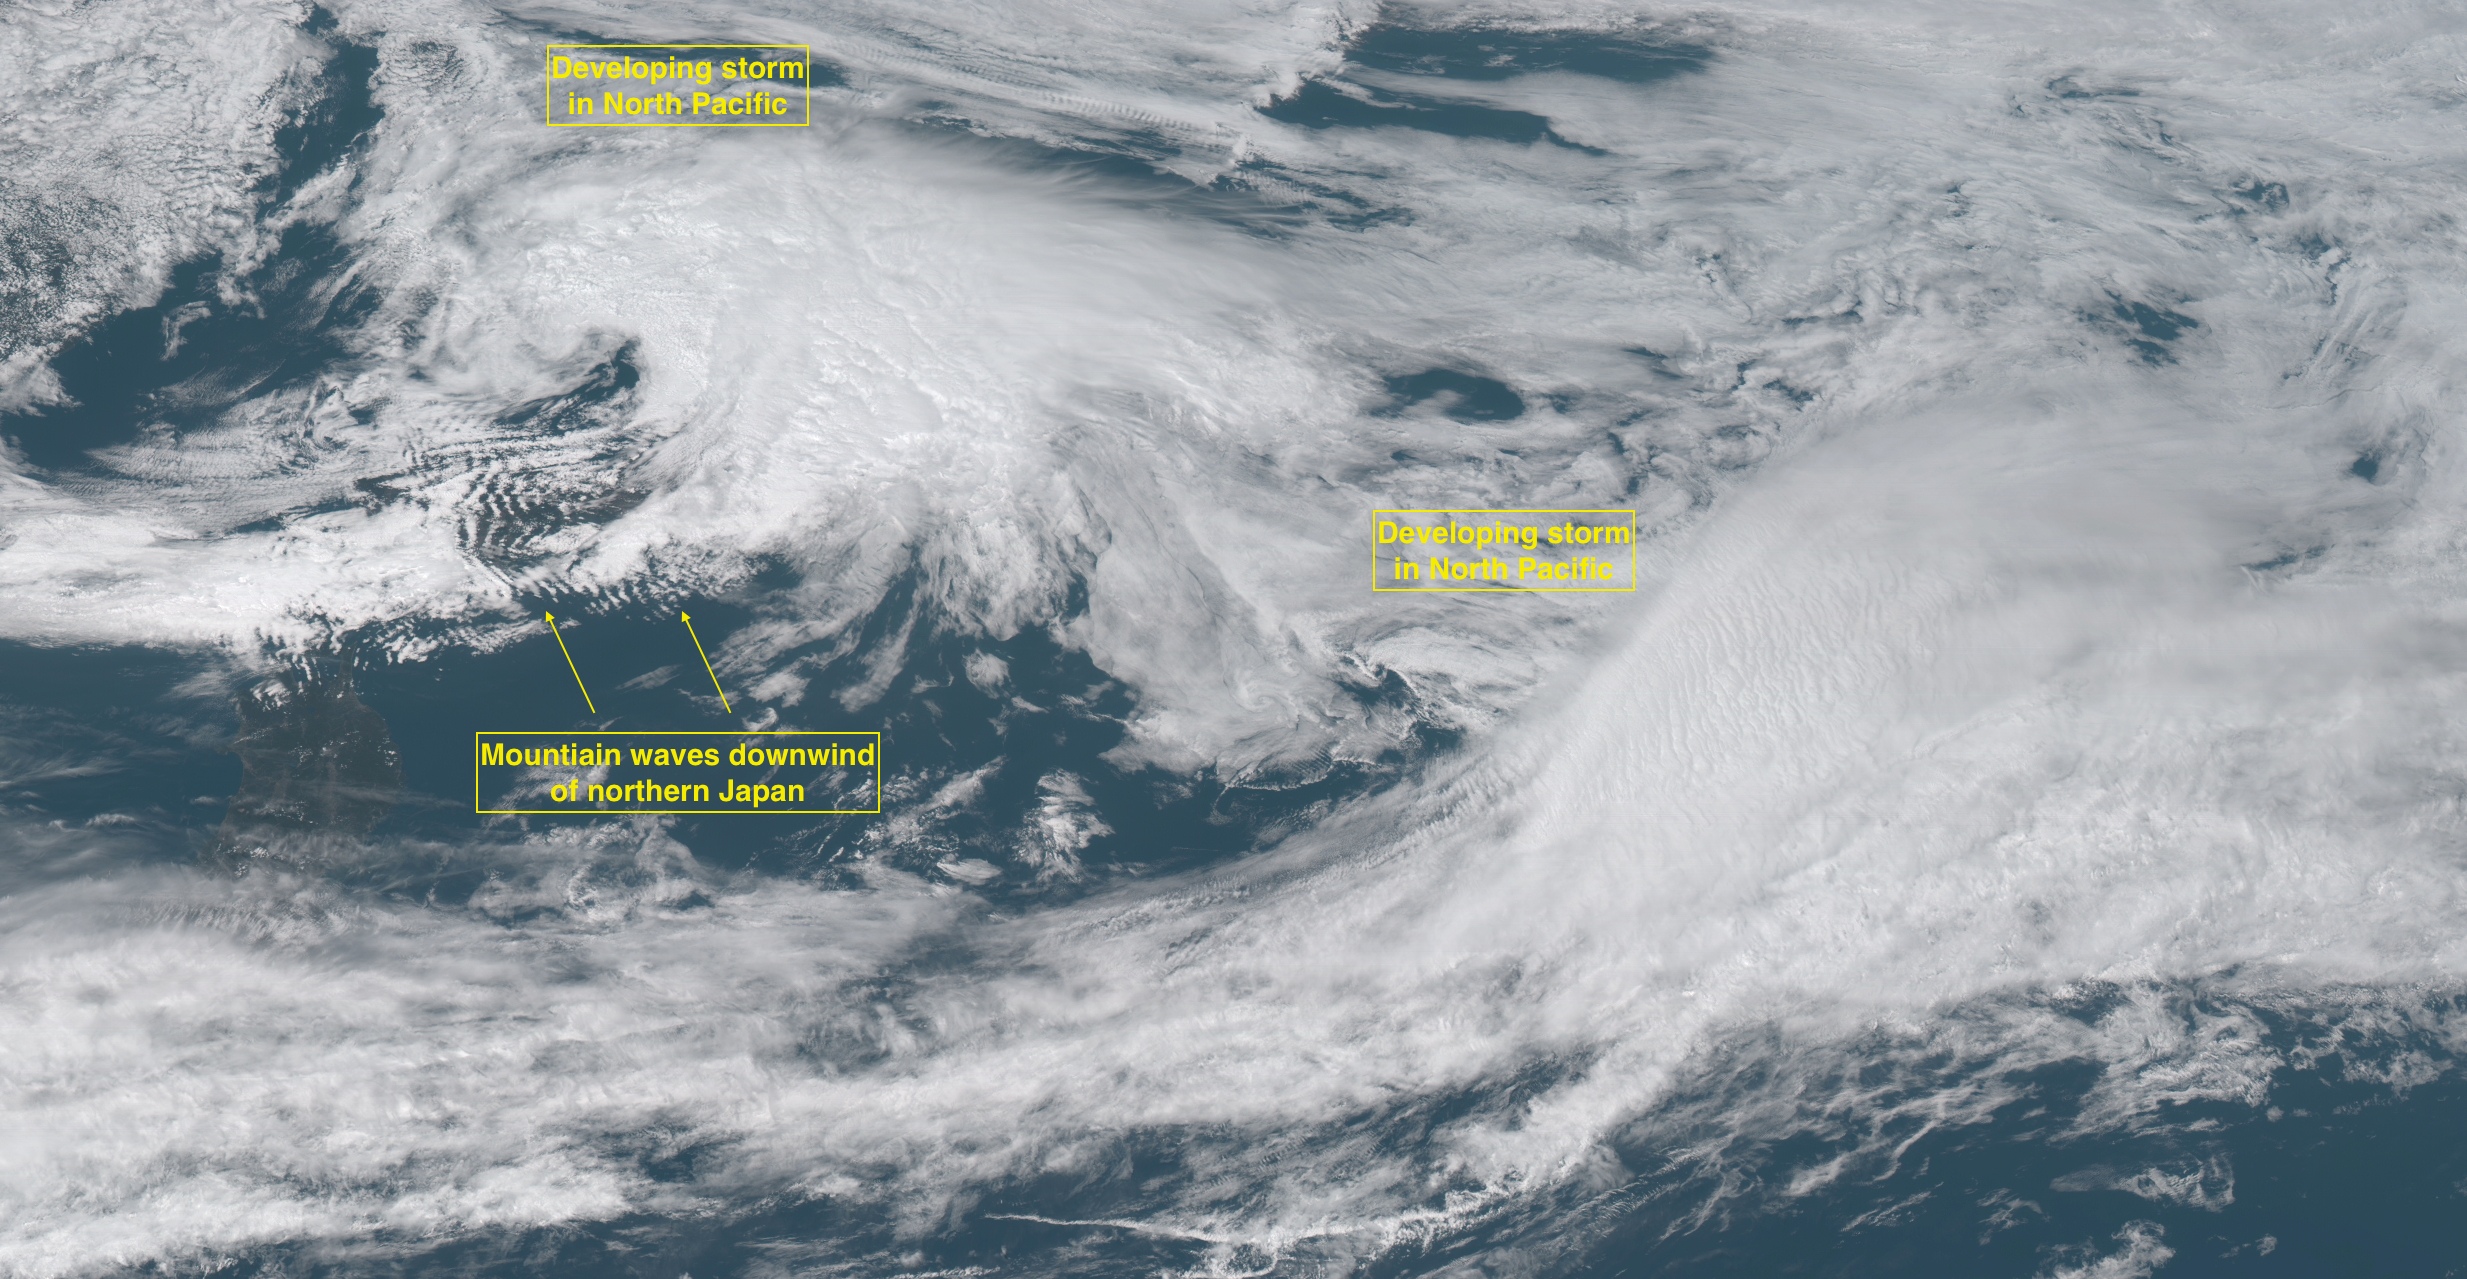 Mountain waves downwind of Japan, and developing storms in the North Pacific Ocean